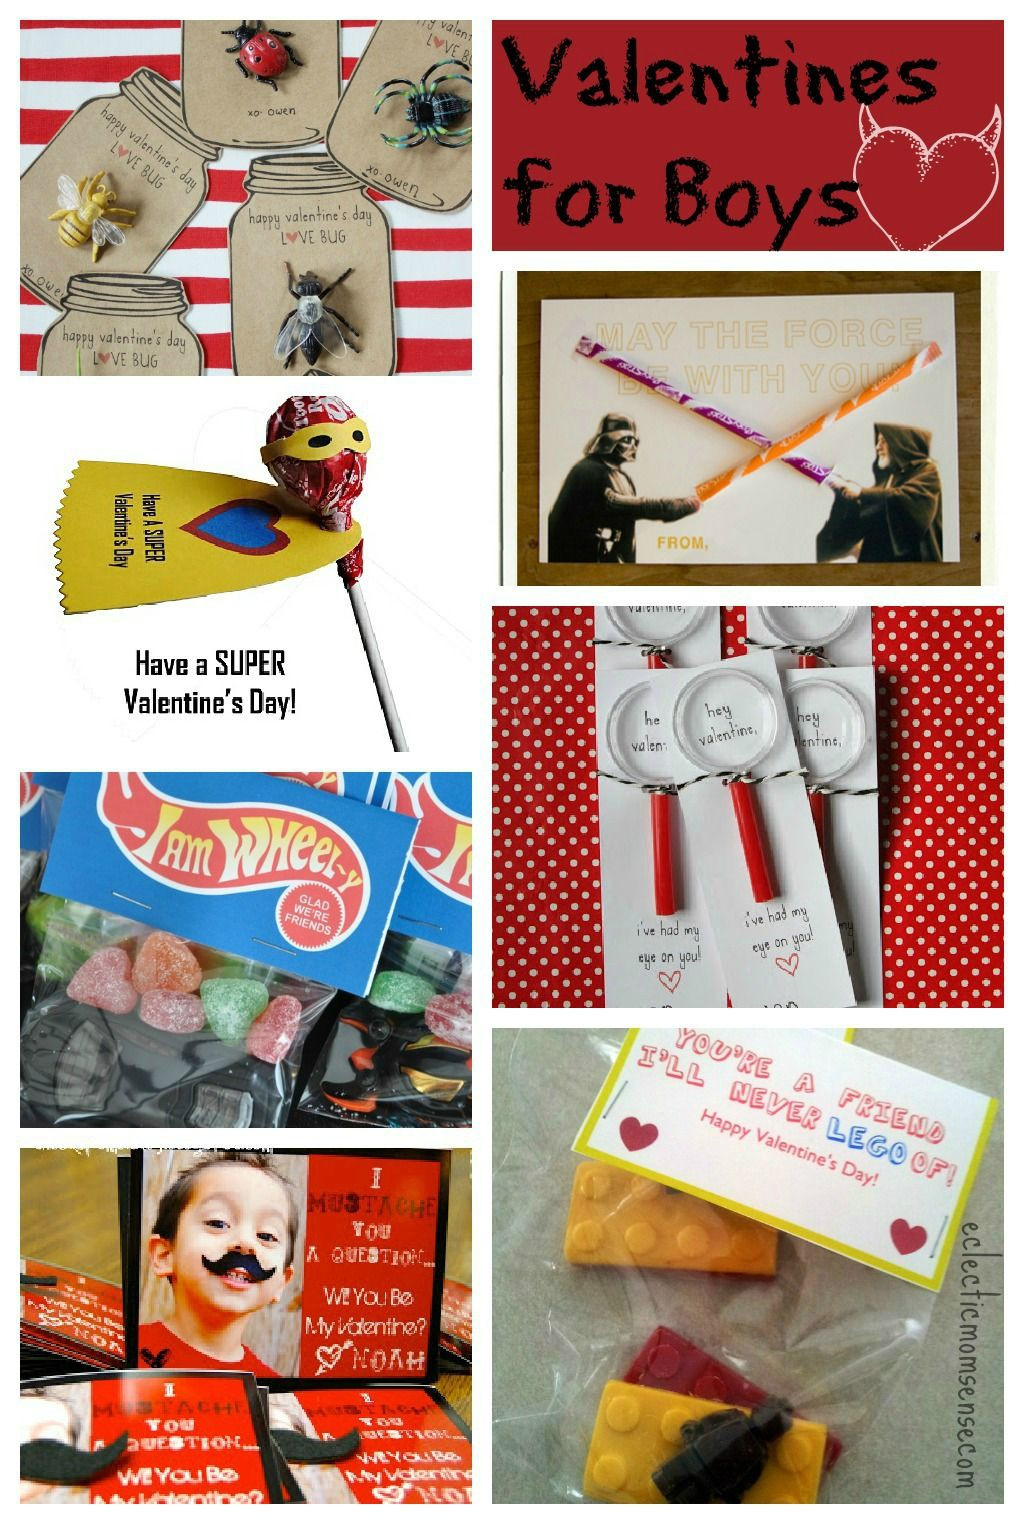 Valentine'S Day Gift Ideas For Boys
 Valentines Ideas for Boys via eclecticmommy